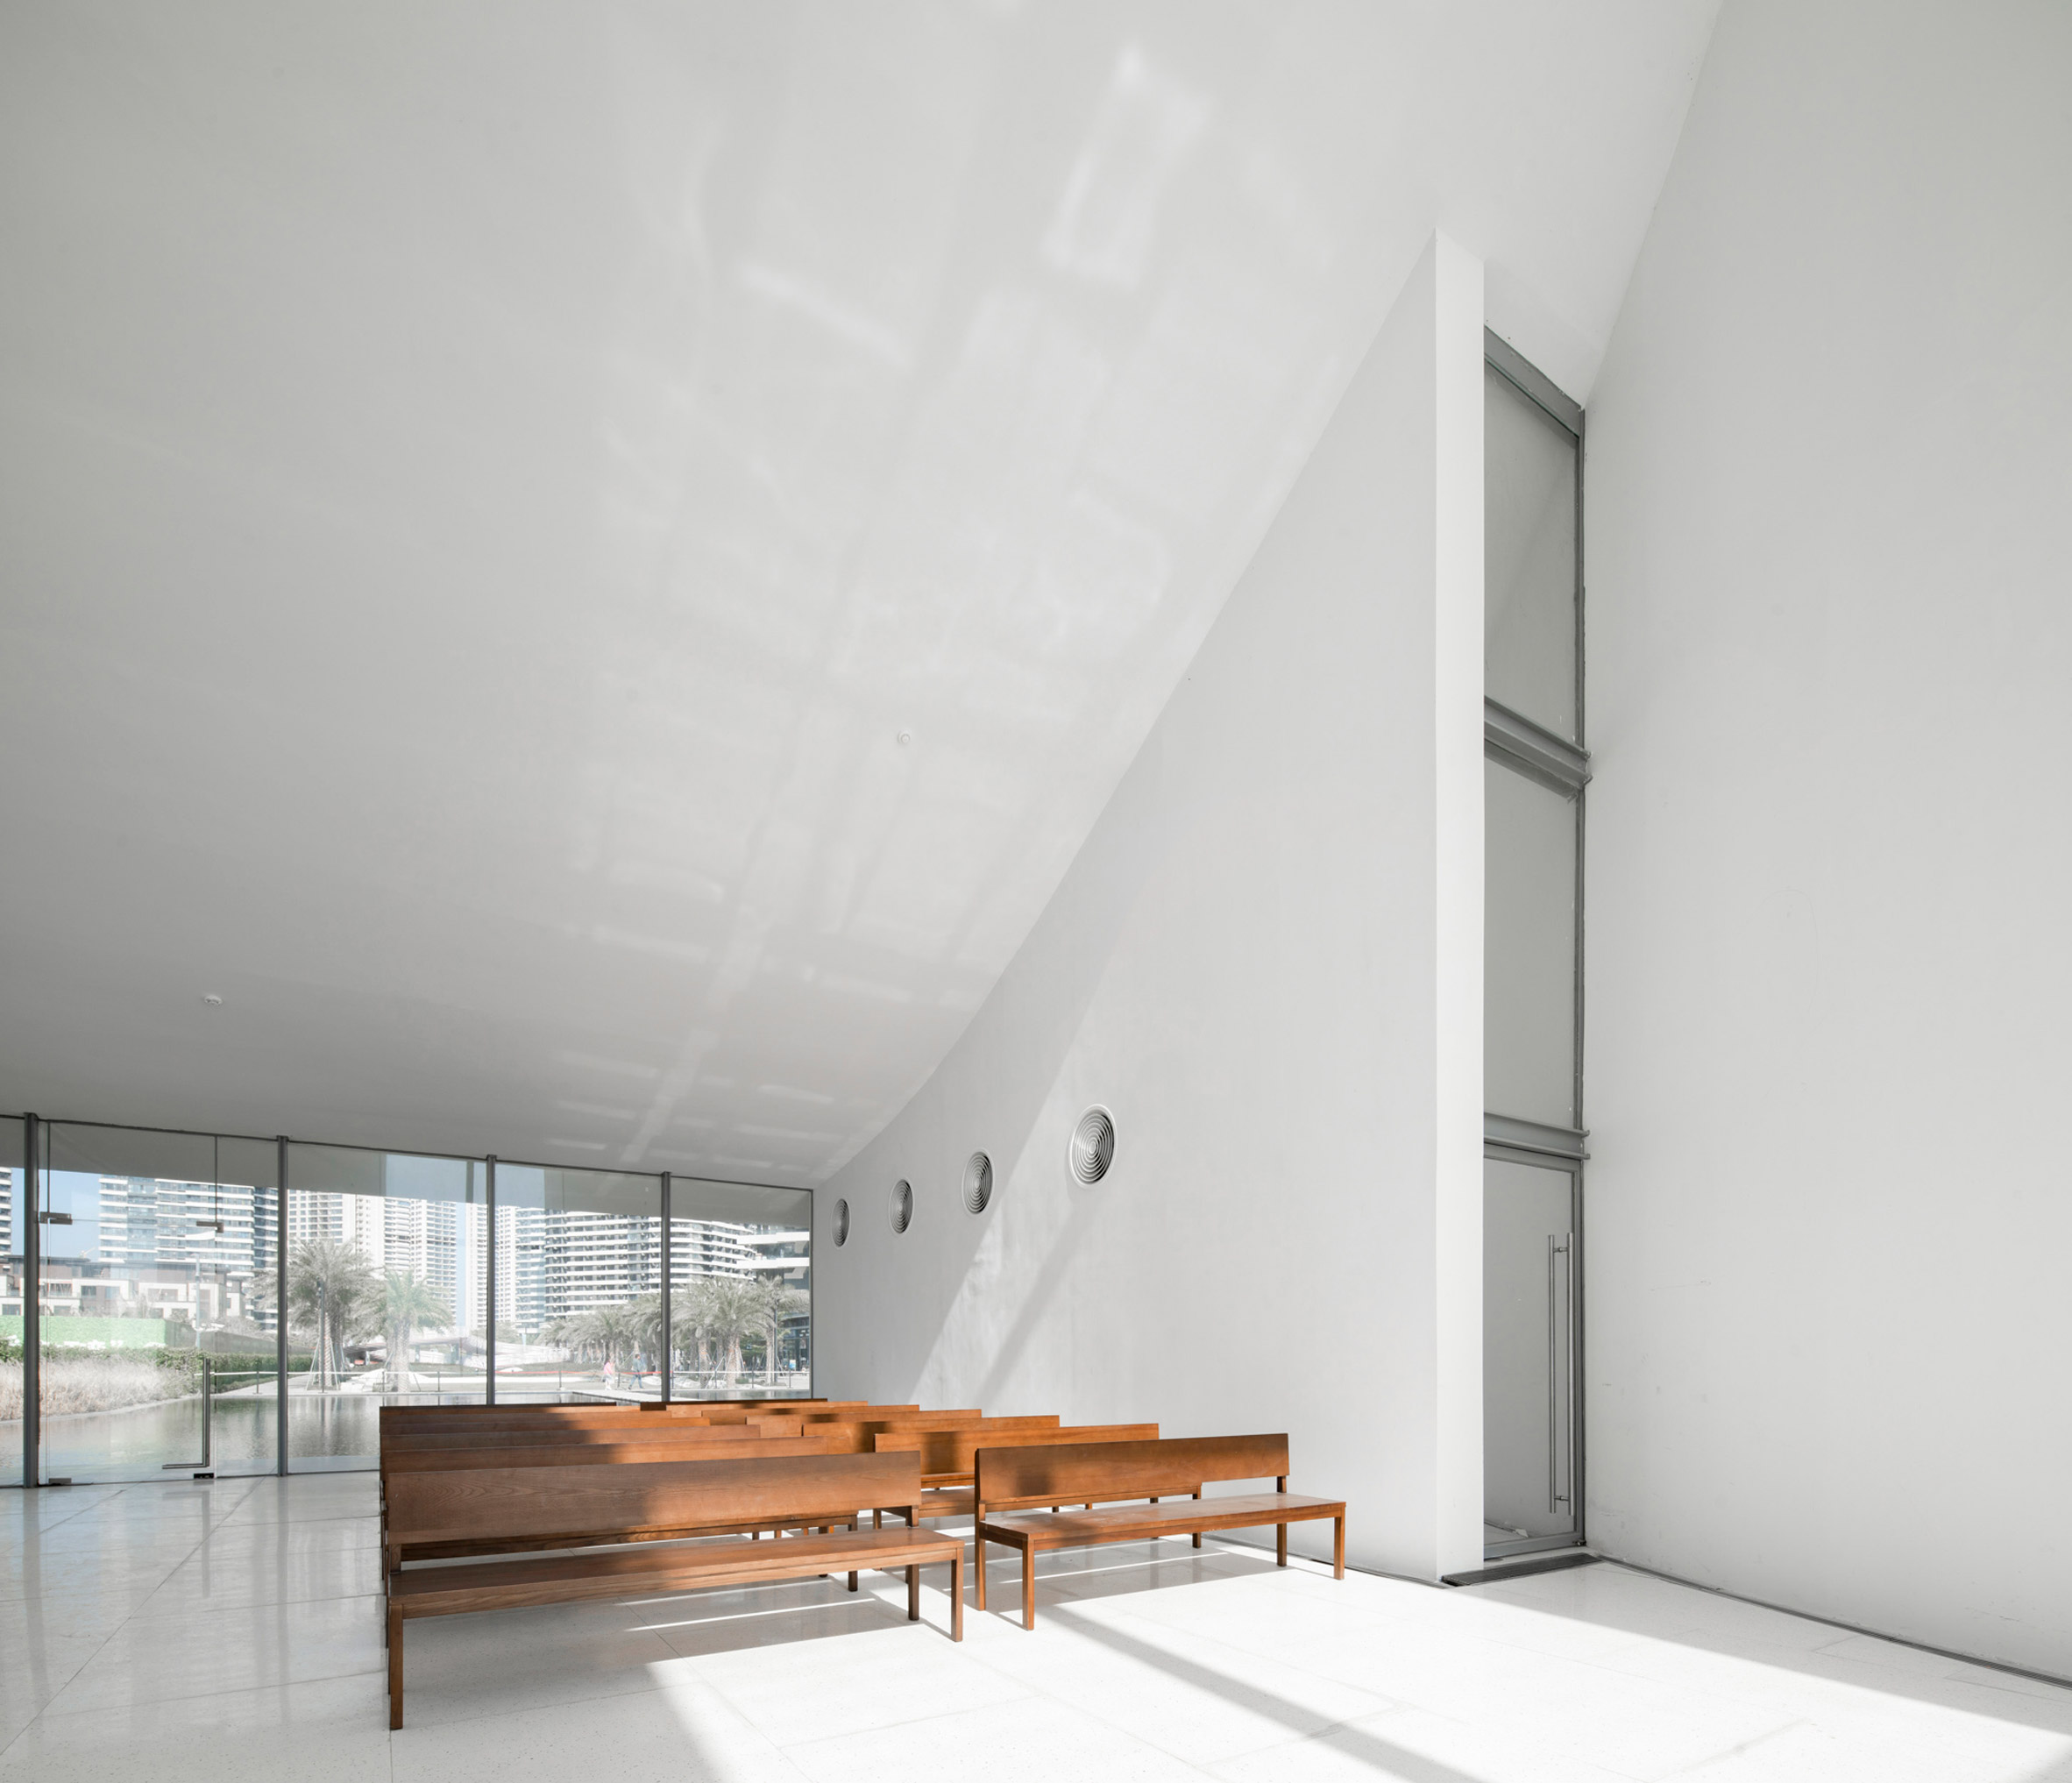 The Seaside Chapel of Jinting Bay has white interiors